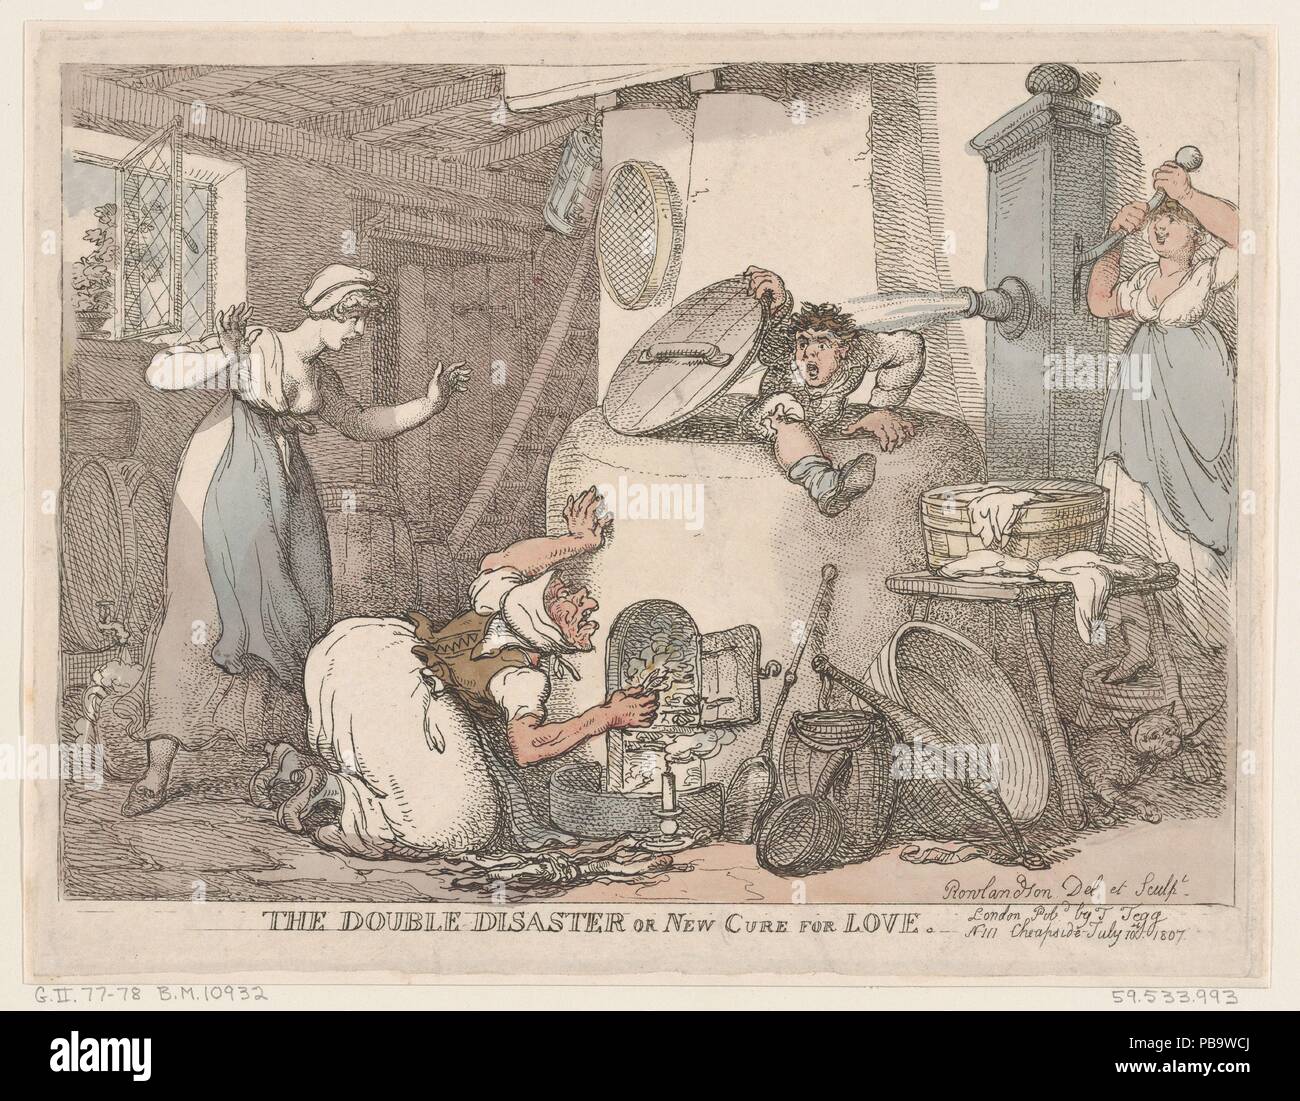 The Double Disaster, or New Cure for Love. Artist: Thomas Rowlandson (British, London 1757-1827 London). Dimensions: Sheet: 8 9/16 × 11 1/8 in. (21.8 × 28.3 cm). Publisher: Thomas Tegg (British, 1776-1846). Date: October 1807. Museum: Metropolitan Museum of Art, New York, USA. Stock Photo